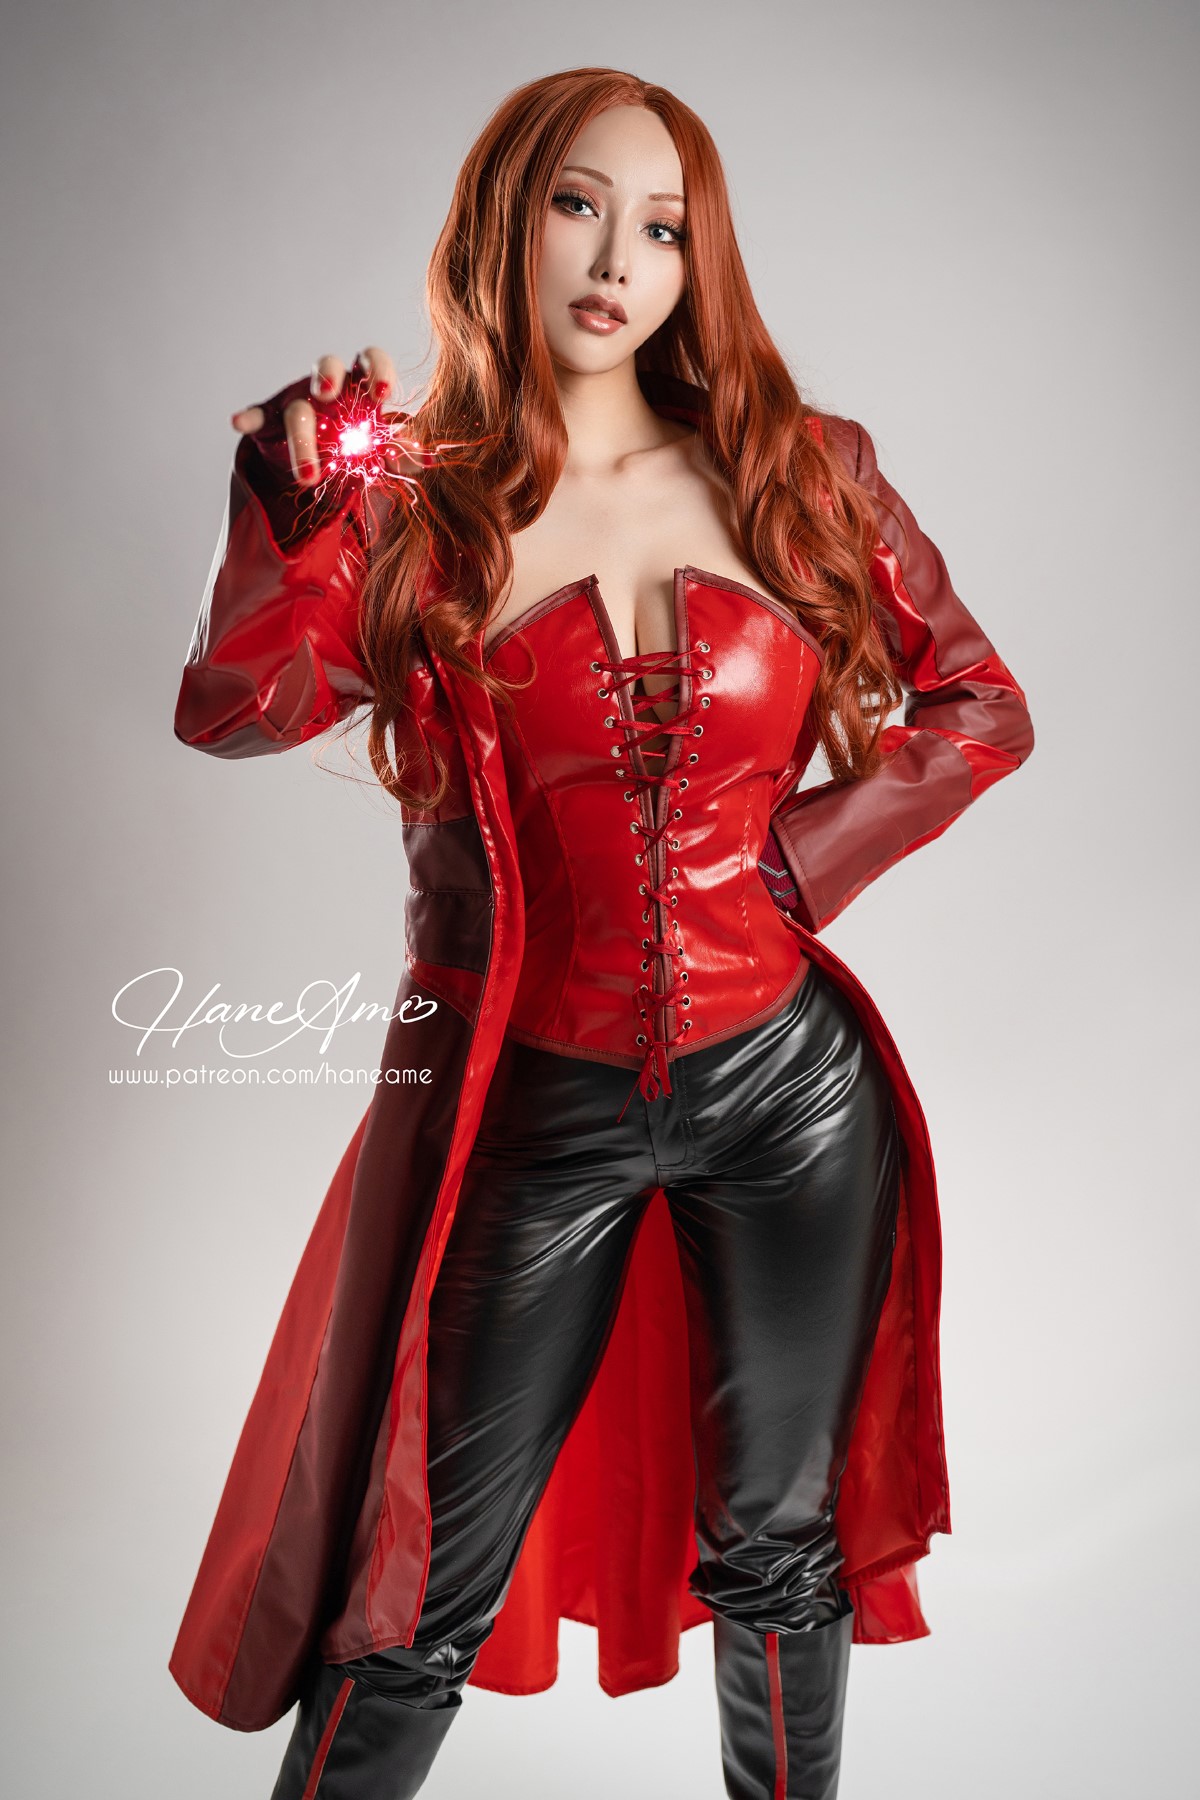 Coser@HaneAme Scarlet Witch 0022 3345859917.jpg